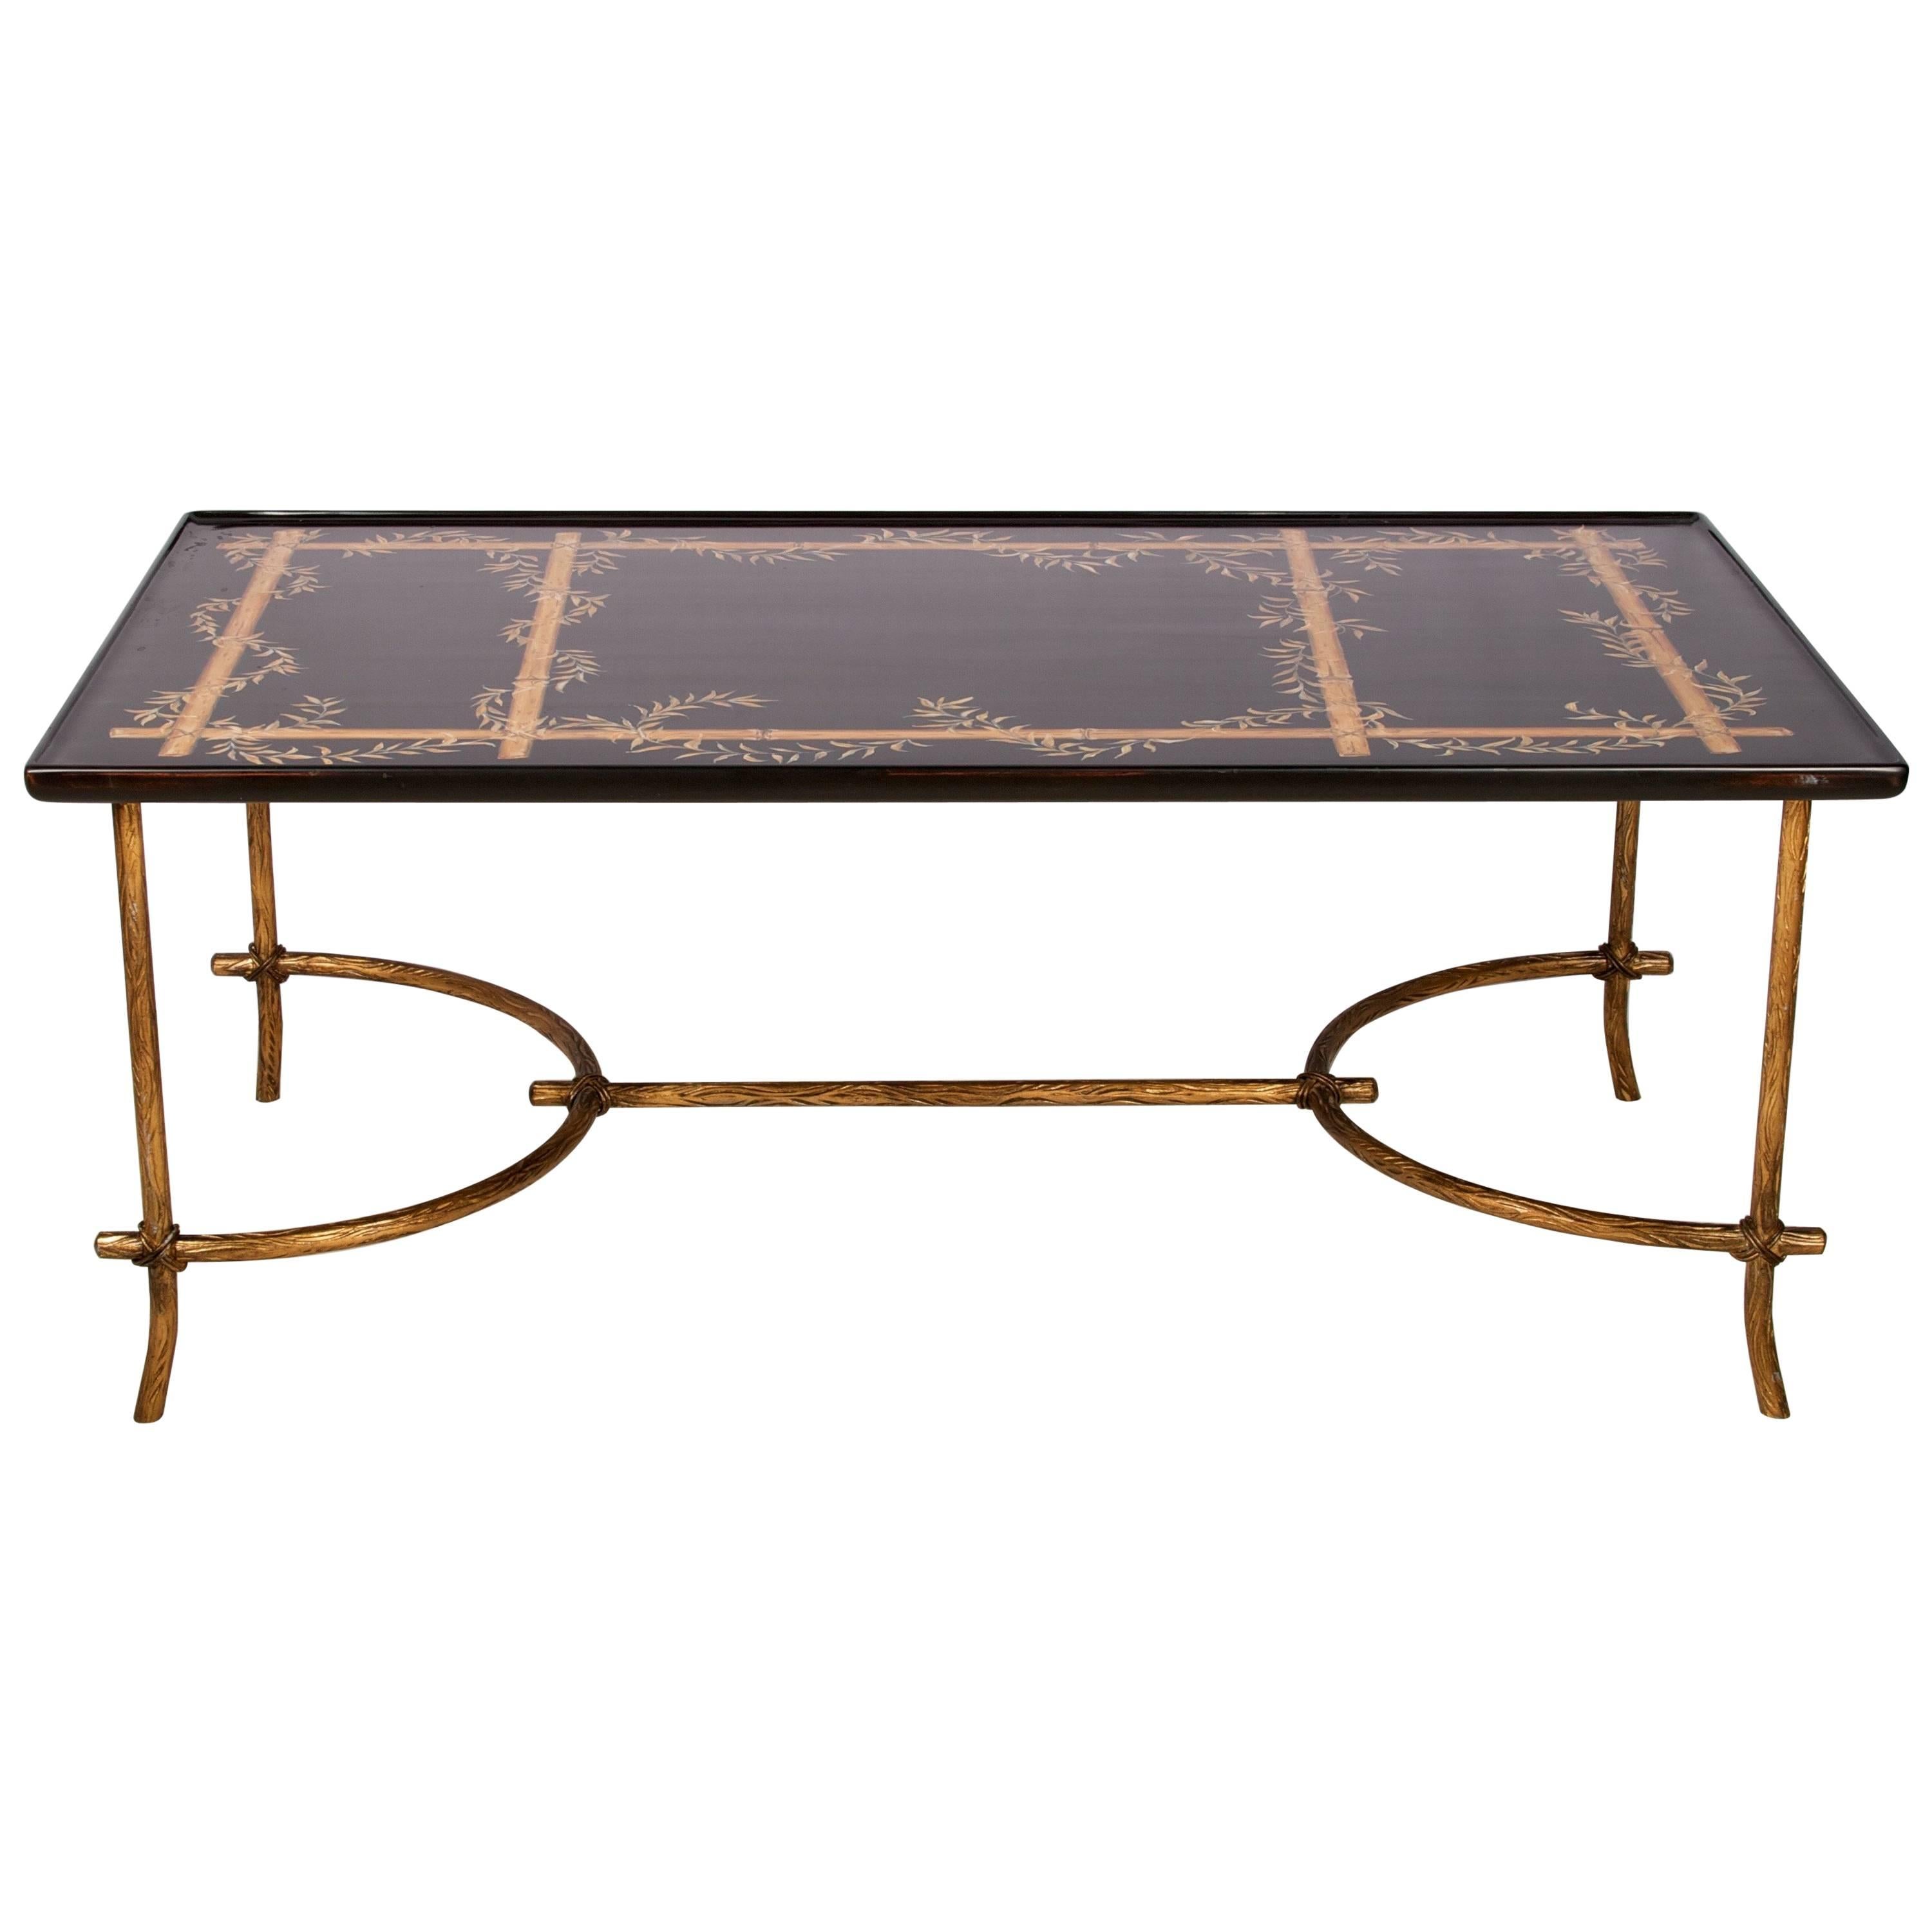 Modern Chinoiserie Decorated Coffee Table with Faux Gild Metal Legs